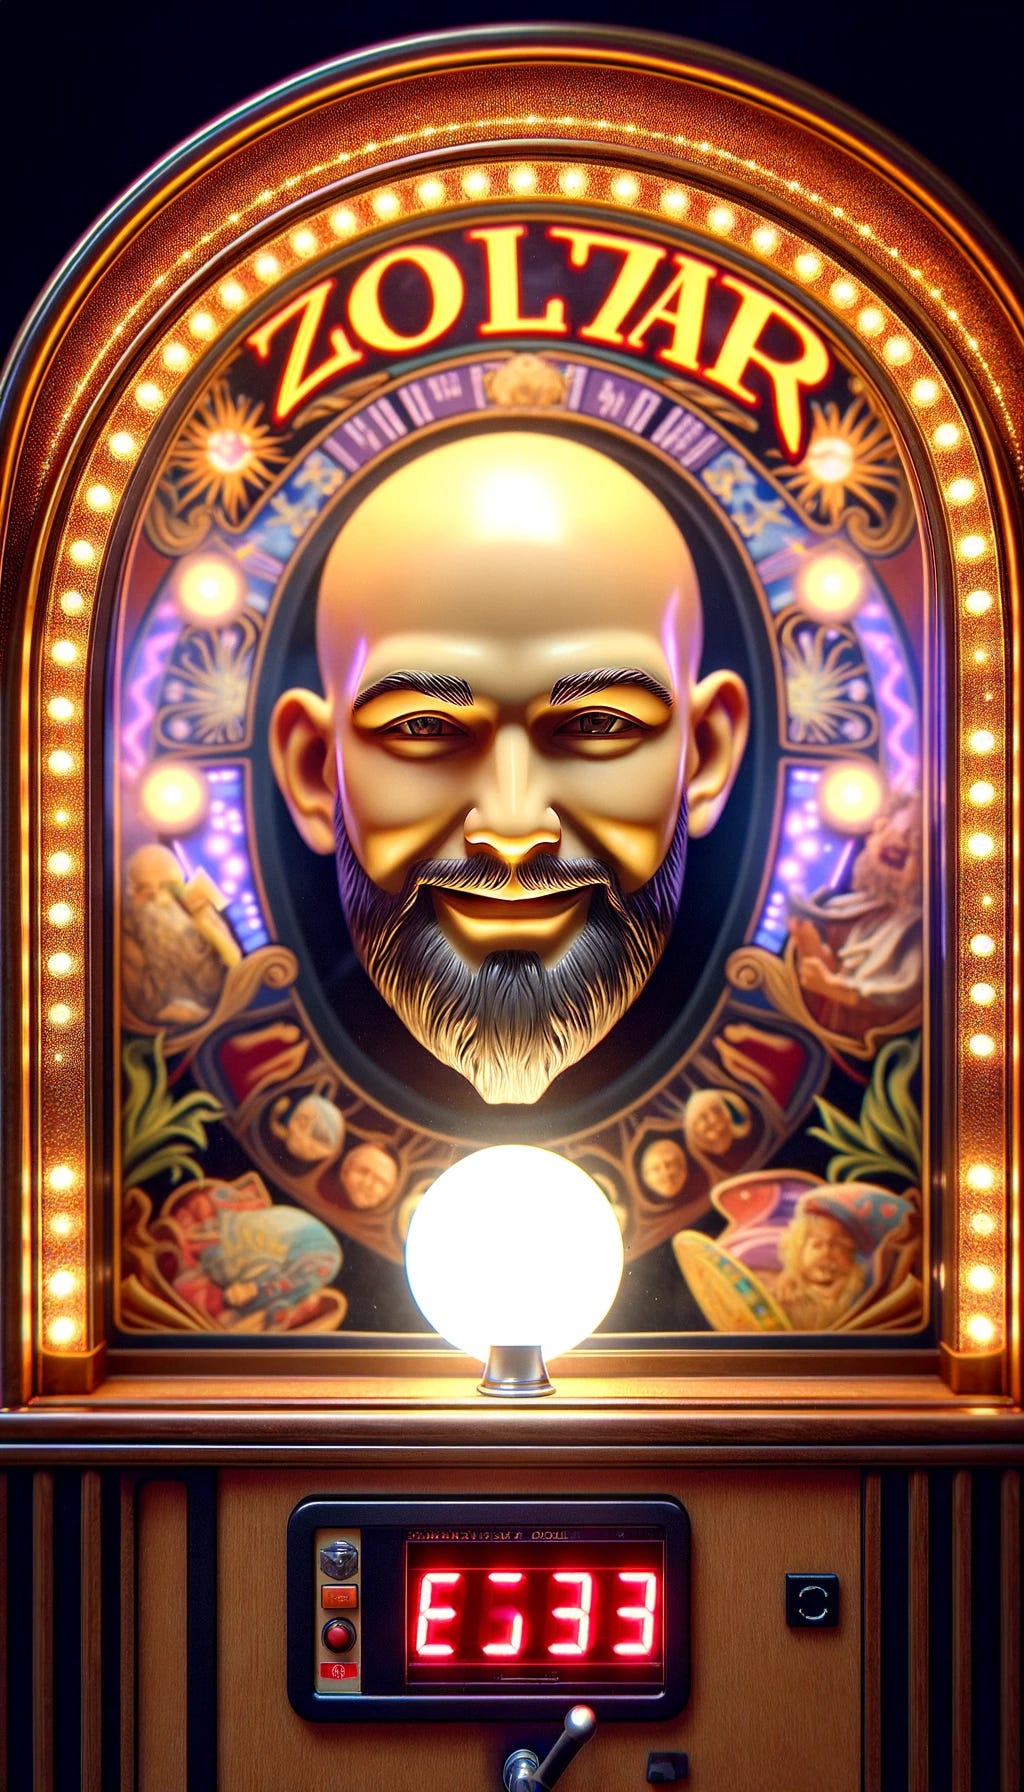 Illustrate a close-up of the interior of a Zoltar fortune-telling machine, this time featuring an abstract figure that suggests a young, bald man with a beard and a friendly smile. The youthful appearance of the figure should be accentuated by a modern and stylish beard. The figure is surrounded by mystical elements like a bright crystal ball and celestial decorations. Include a visible coin slot on the front panel of the machine for interaction. The ambient lighting should be warm, with a focus on the figure's smooth bald head, trendy beard, and the mystical atmosphere of the machine's interior.